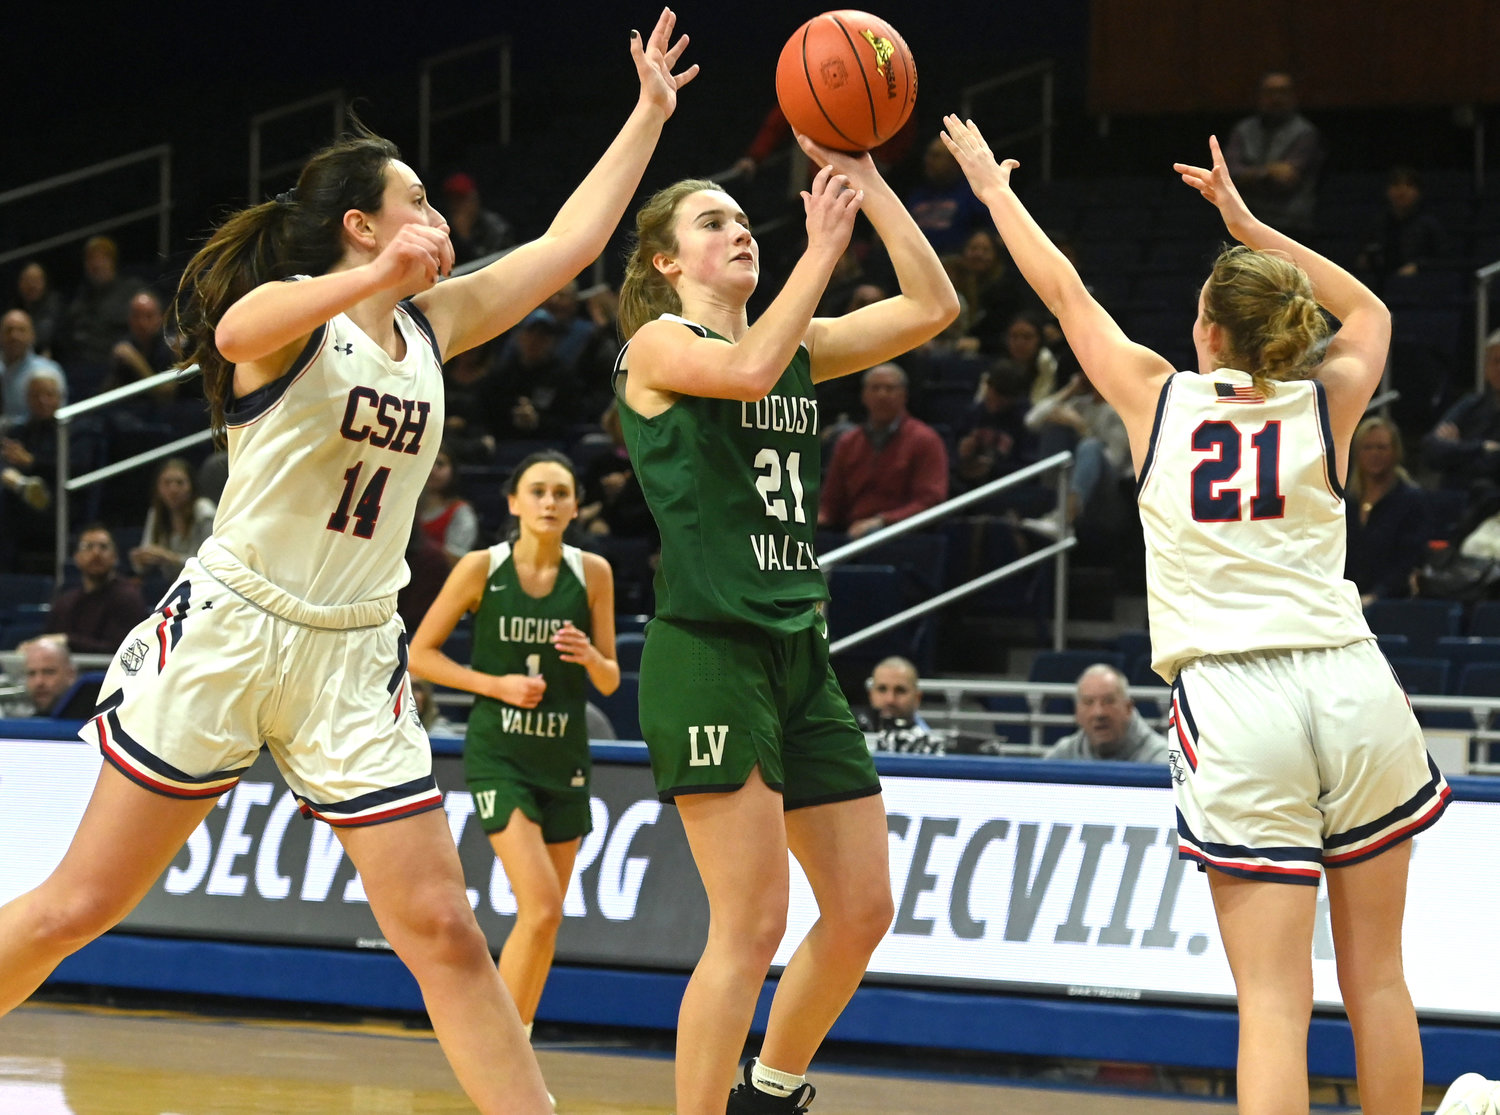 Locust Valley's Payton Tini starred in the Nassau Class B final March 1 with 33 points to lead the Falcons' 41-31 win over Cold Spring Harbor.